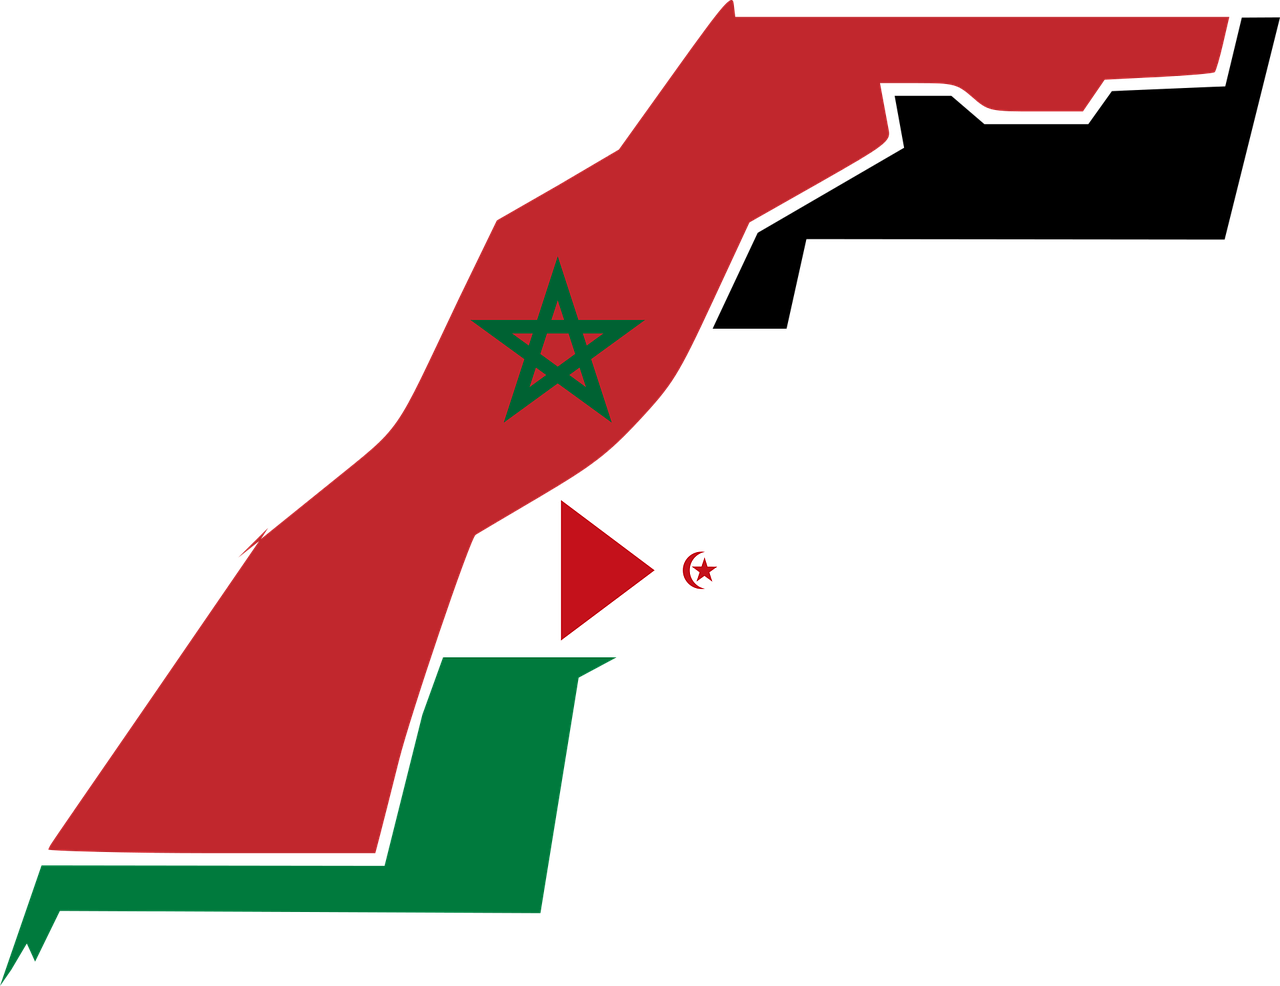 The Sahara’s Cold War – Western Sahara, Morocco, and why the Situation won’t change too soon